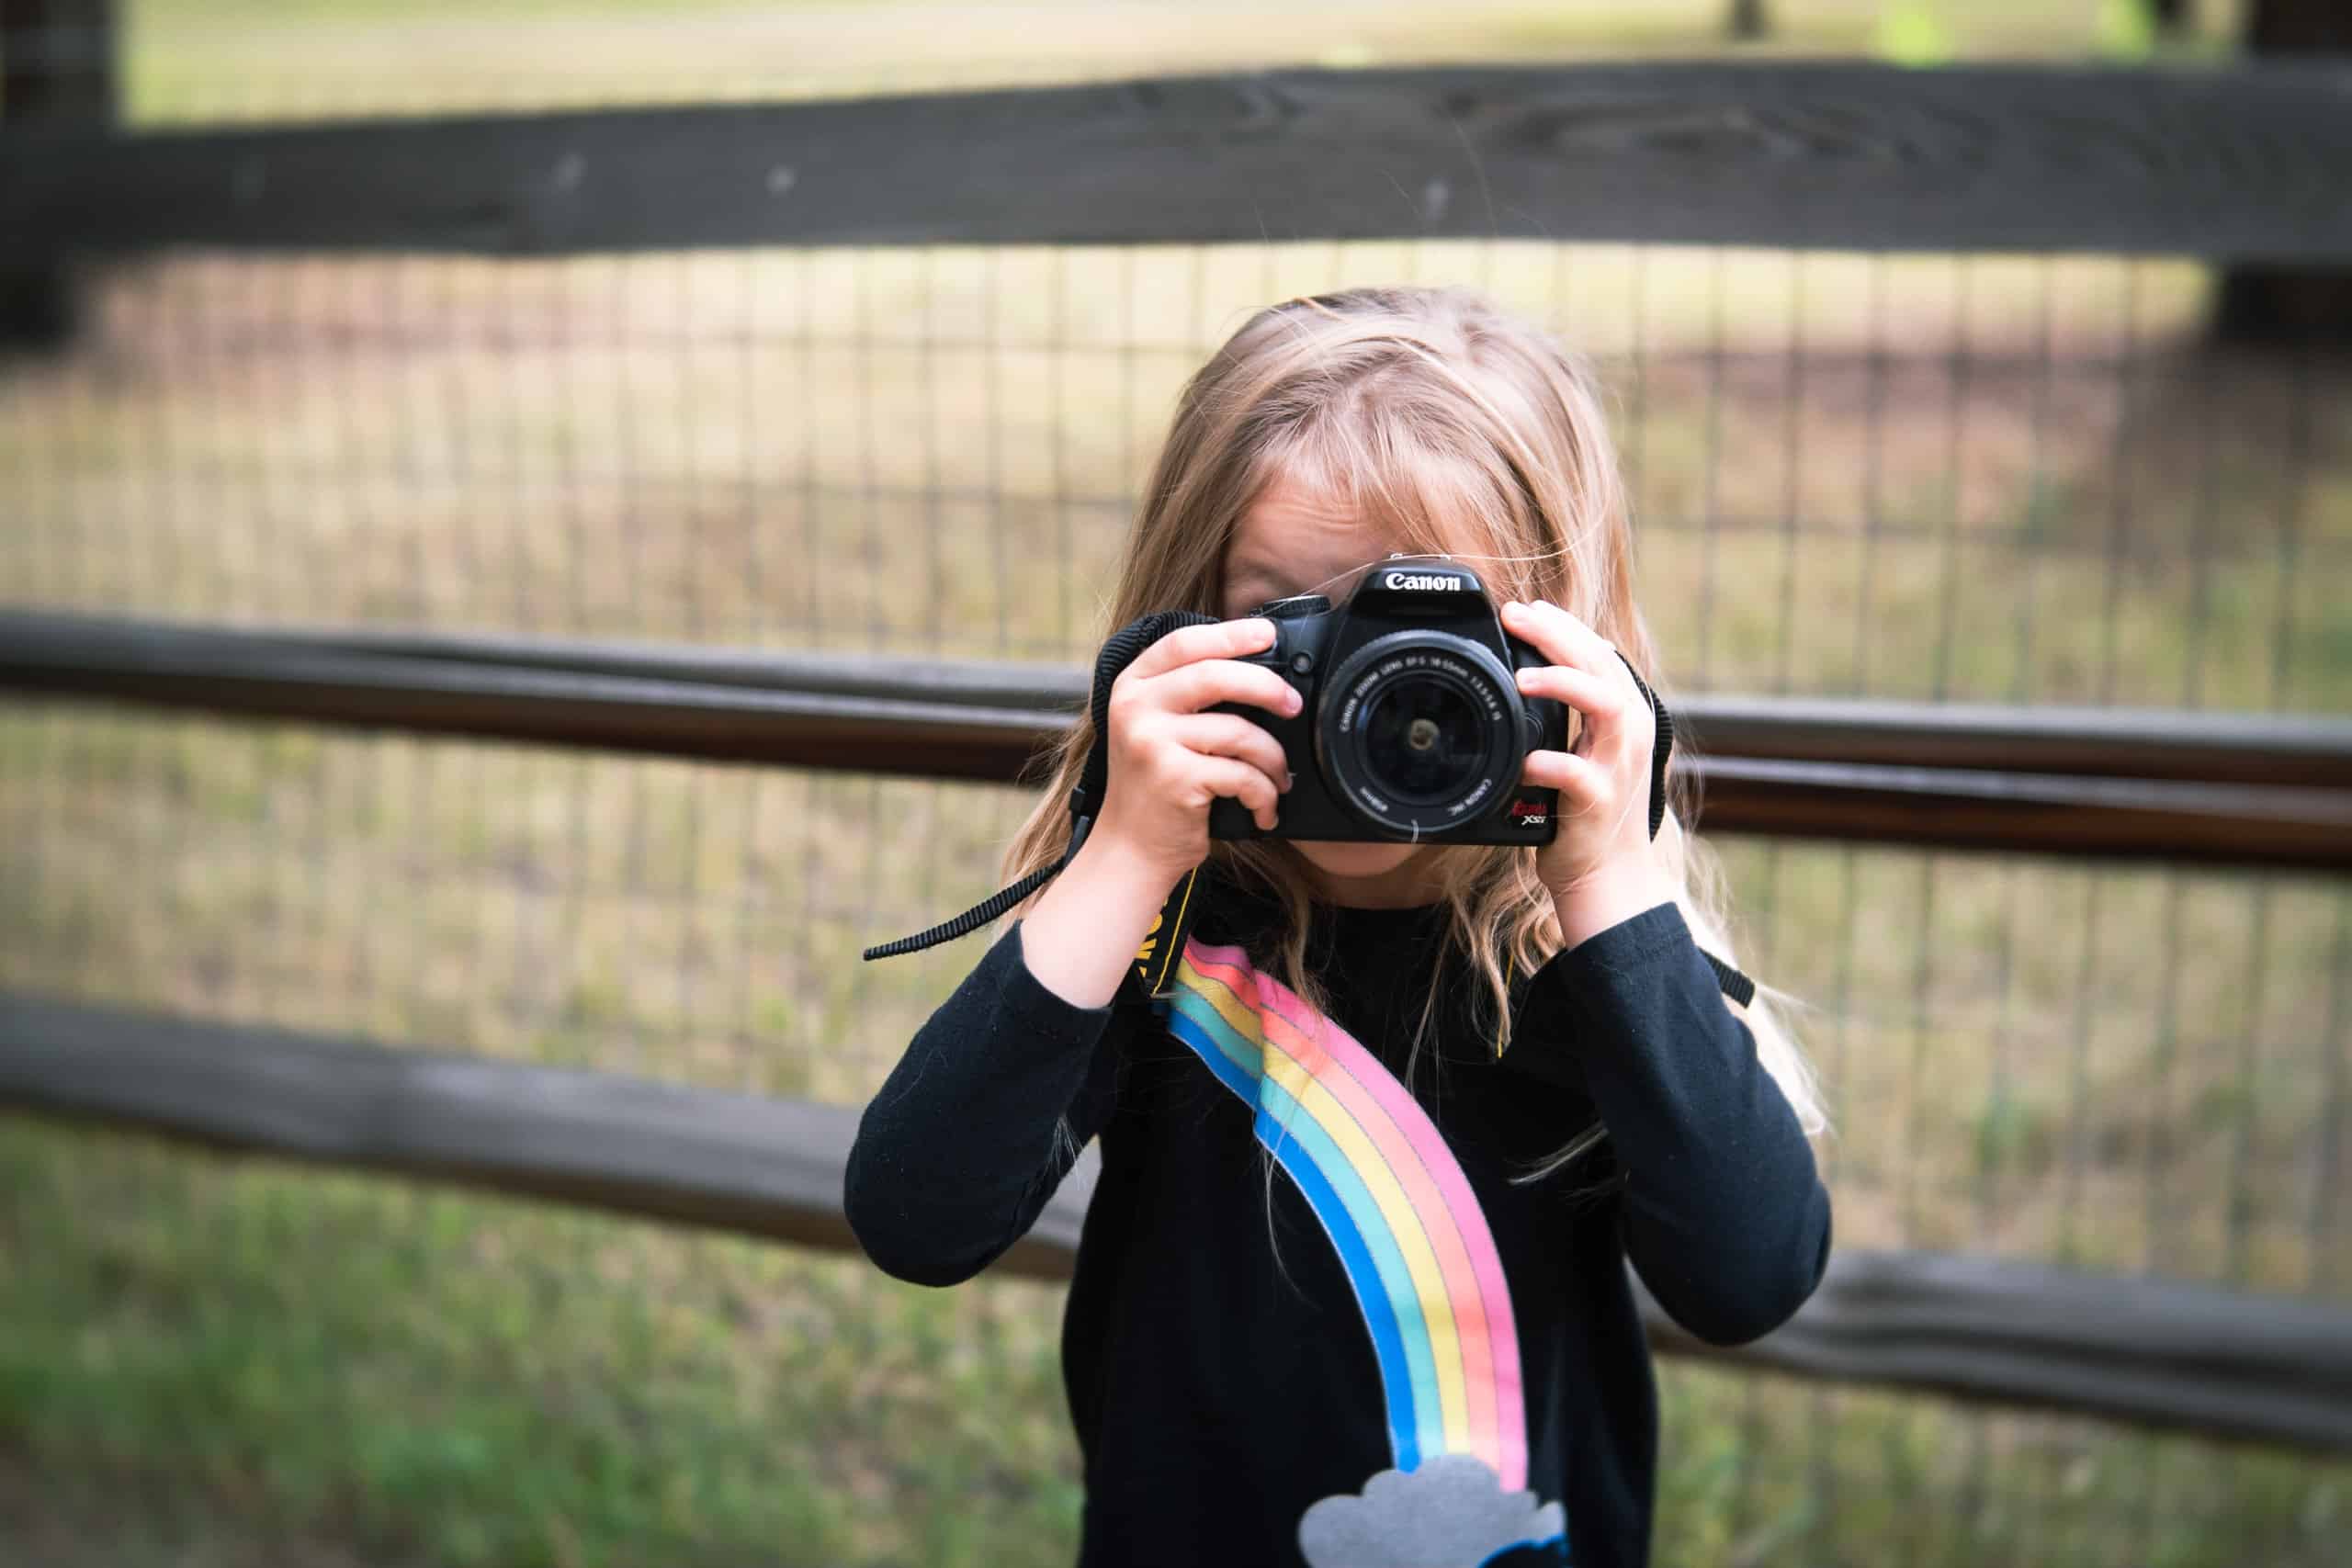 When you give a child a camera